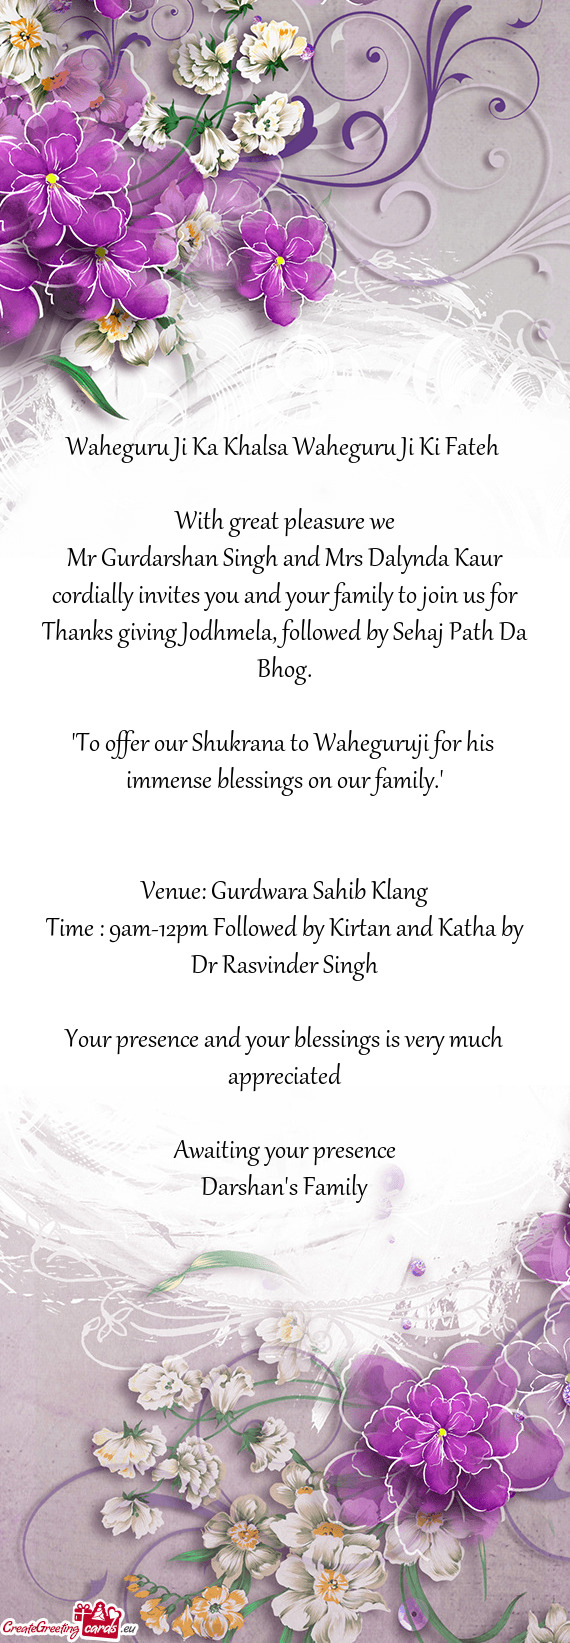 Mr Gurdarshan Singh and Mrs Dalynda Kaur cordially invites you and your family to join us for Thanks